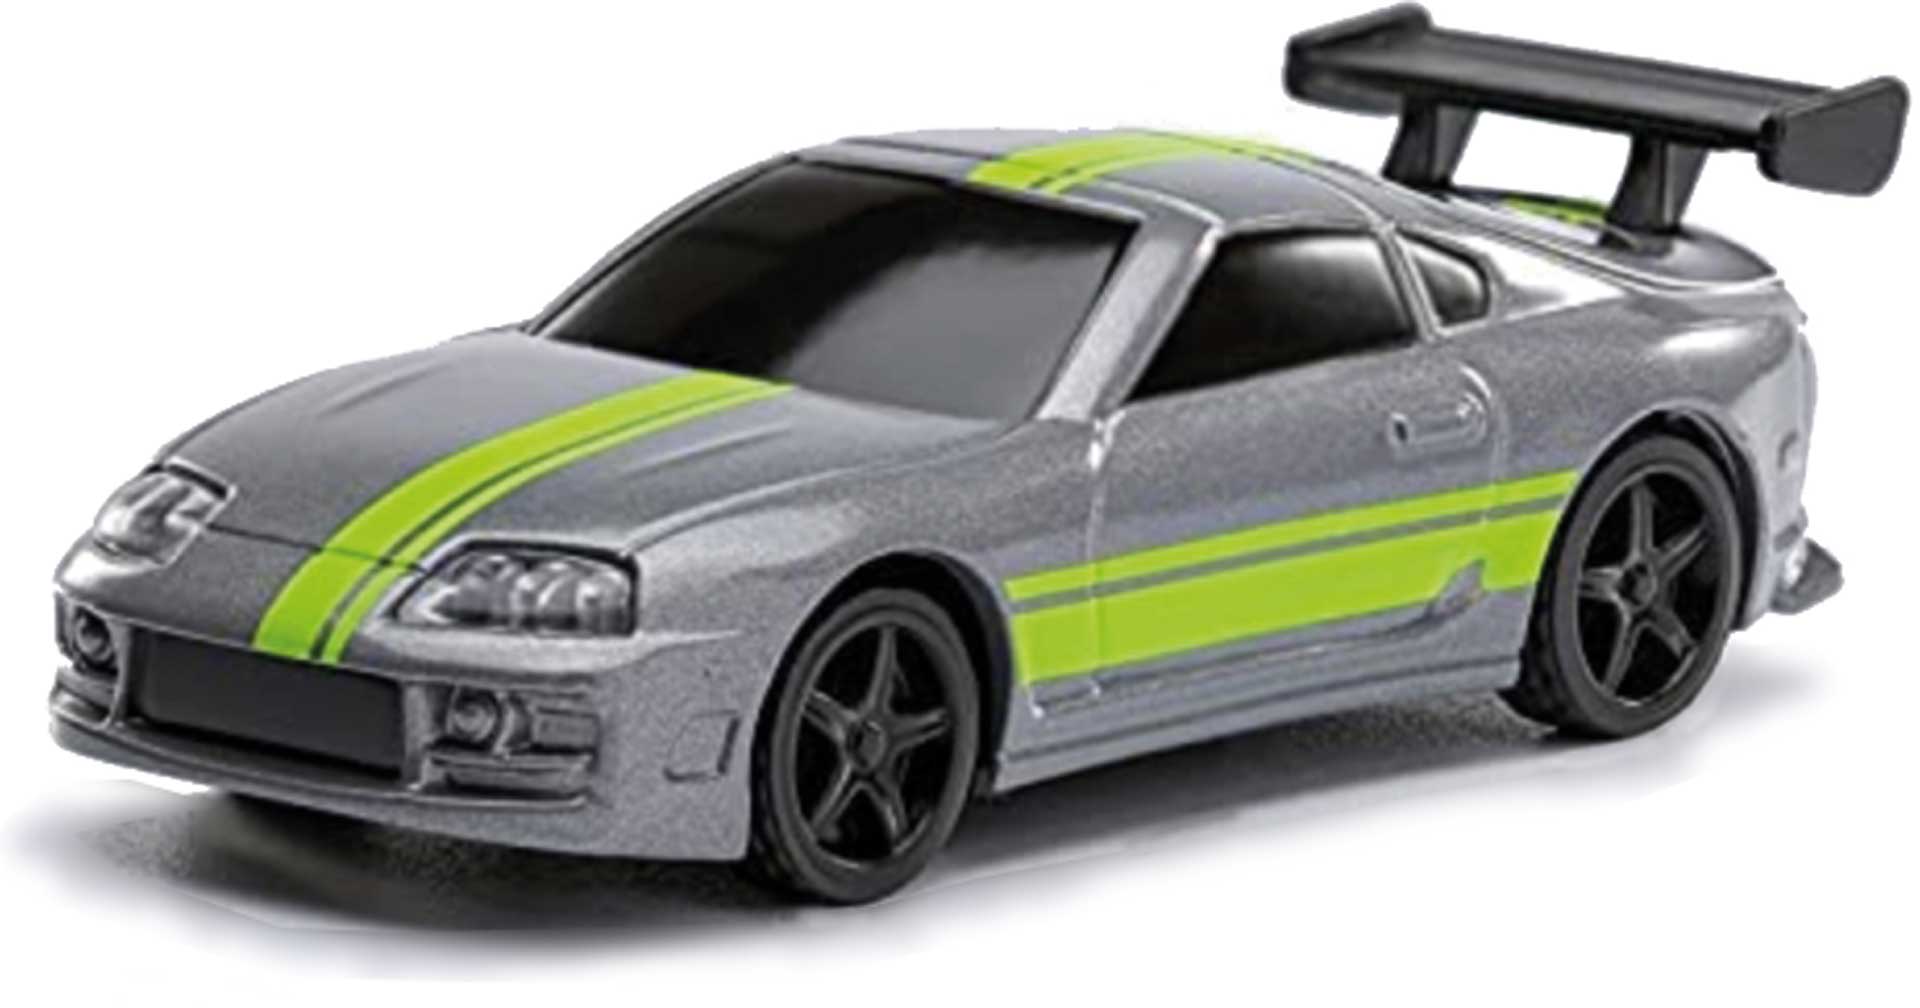 Turbo Racing 1:76 C73 Sports RC Car RTR (Grey with yellow stripes)